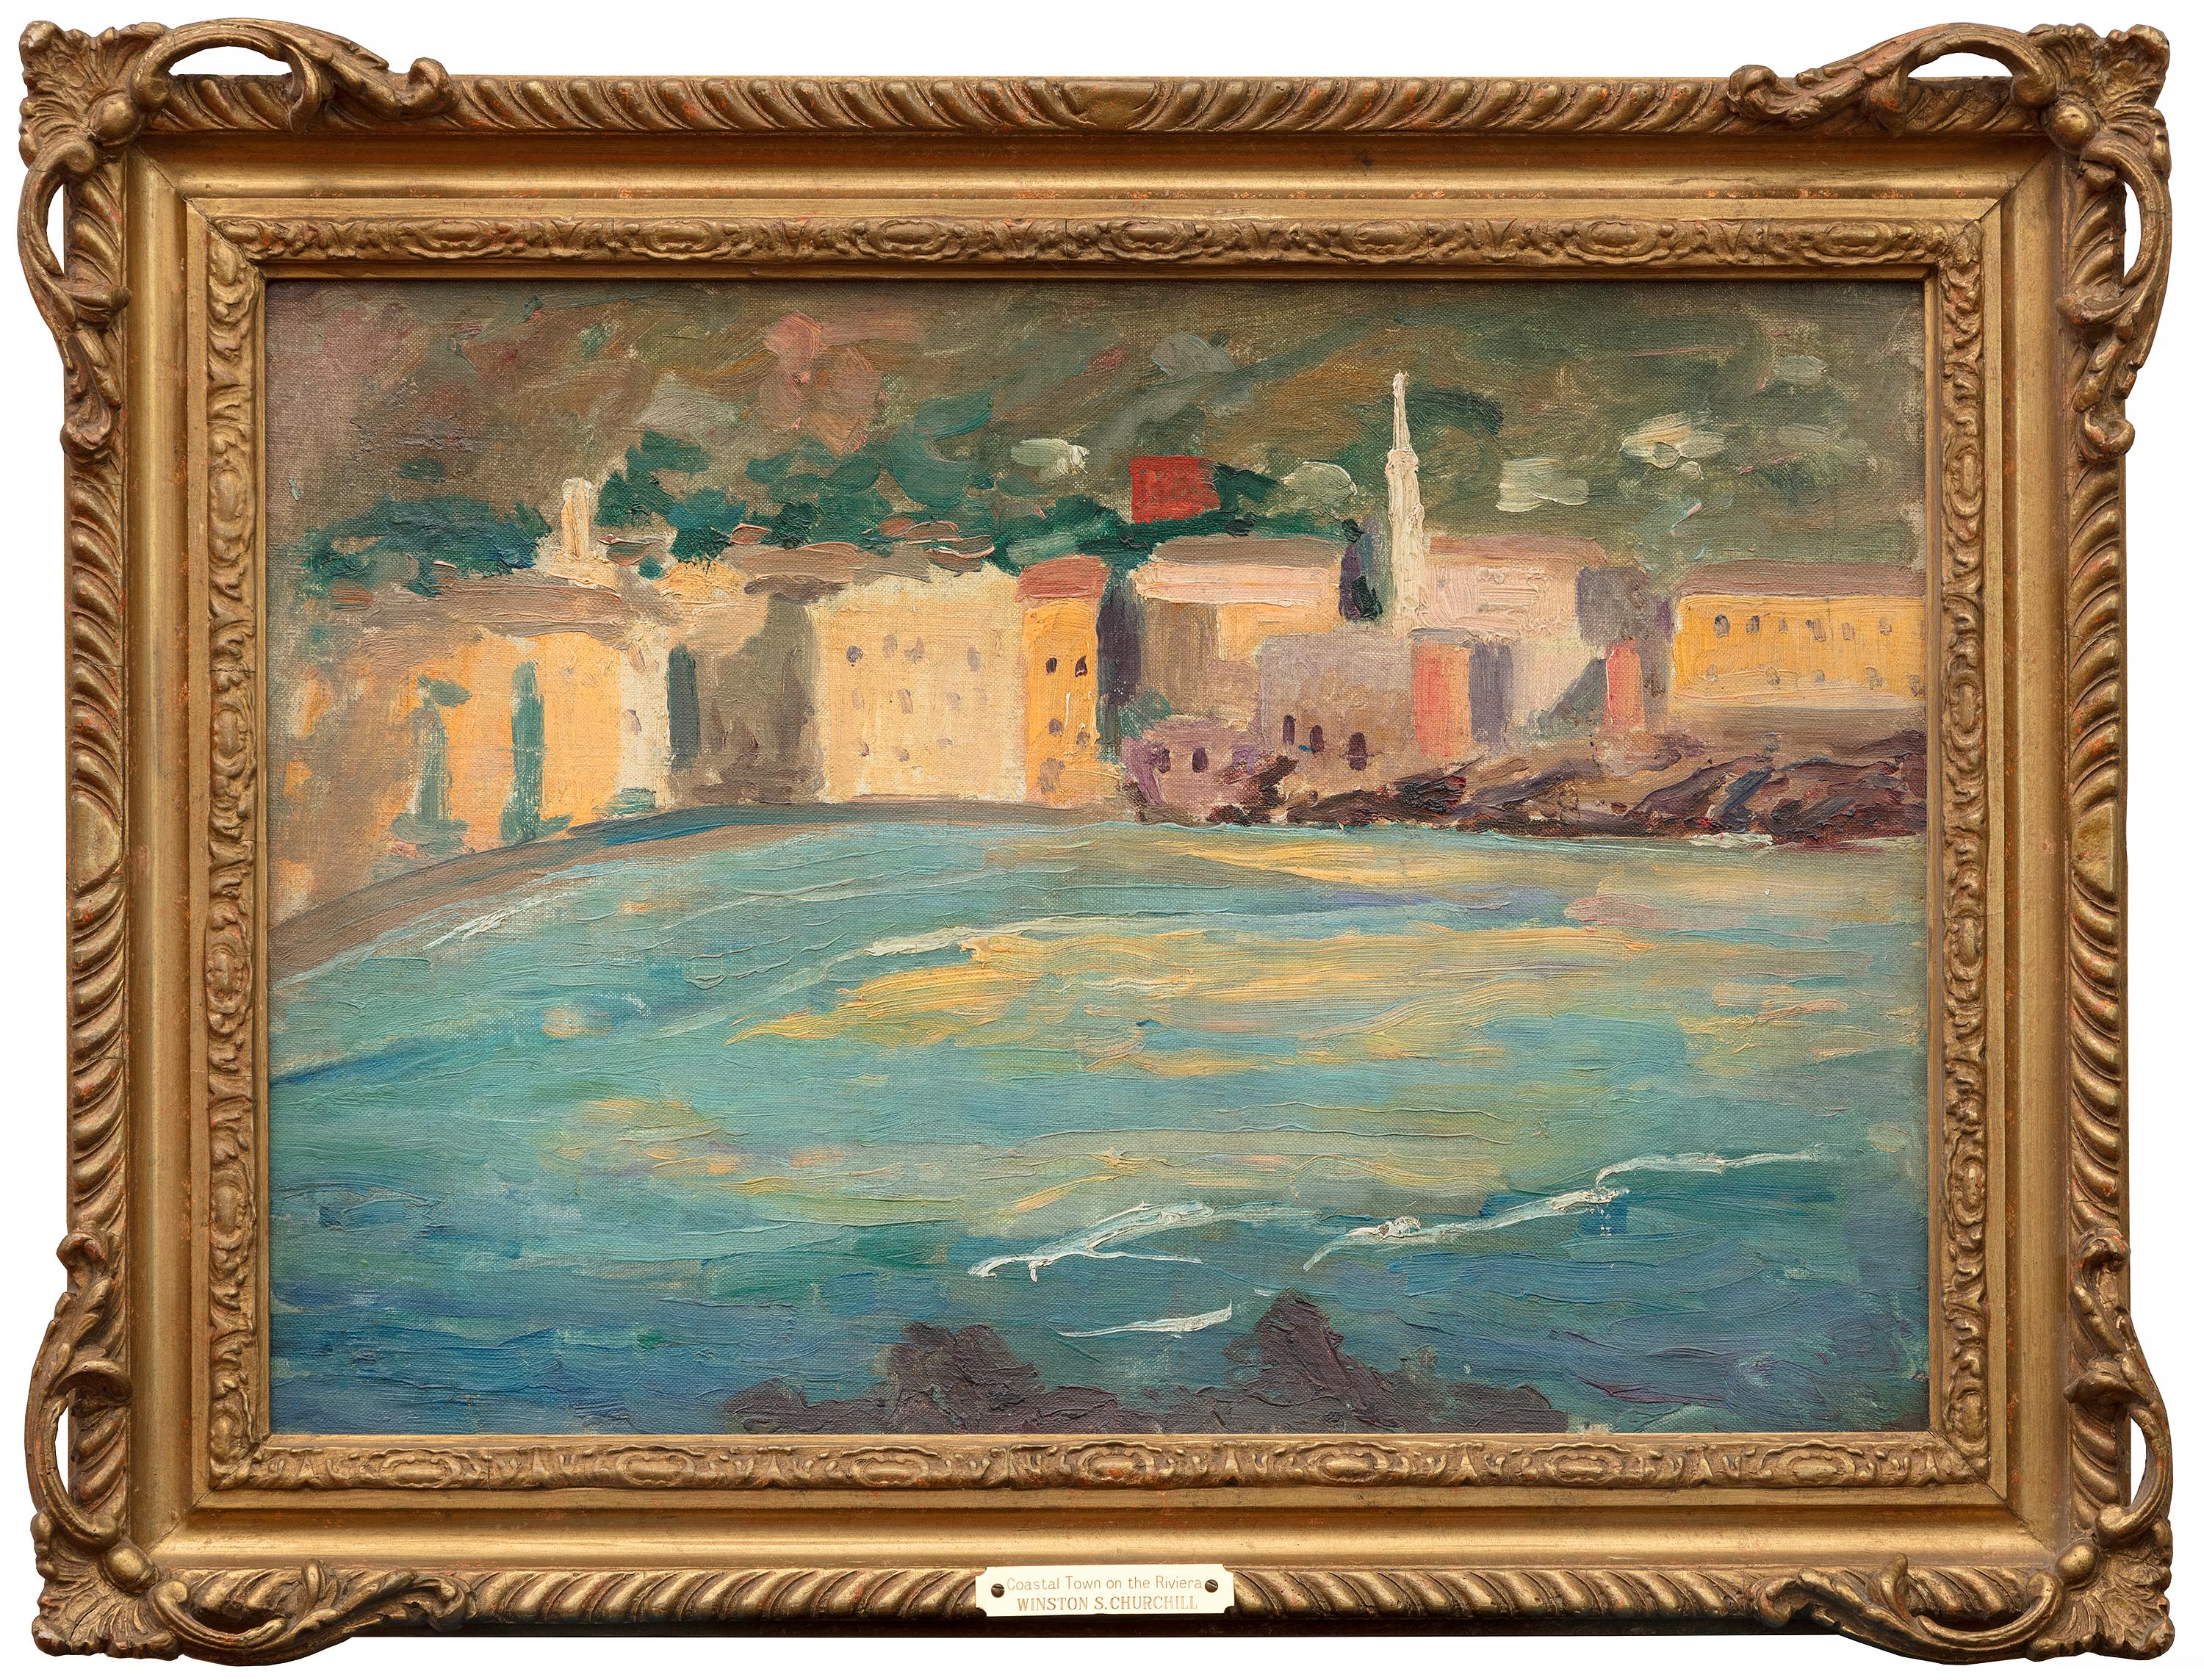 Coastal Town on the Riviera - Painting by Winston Churchill